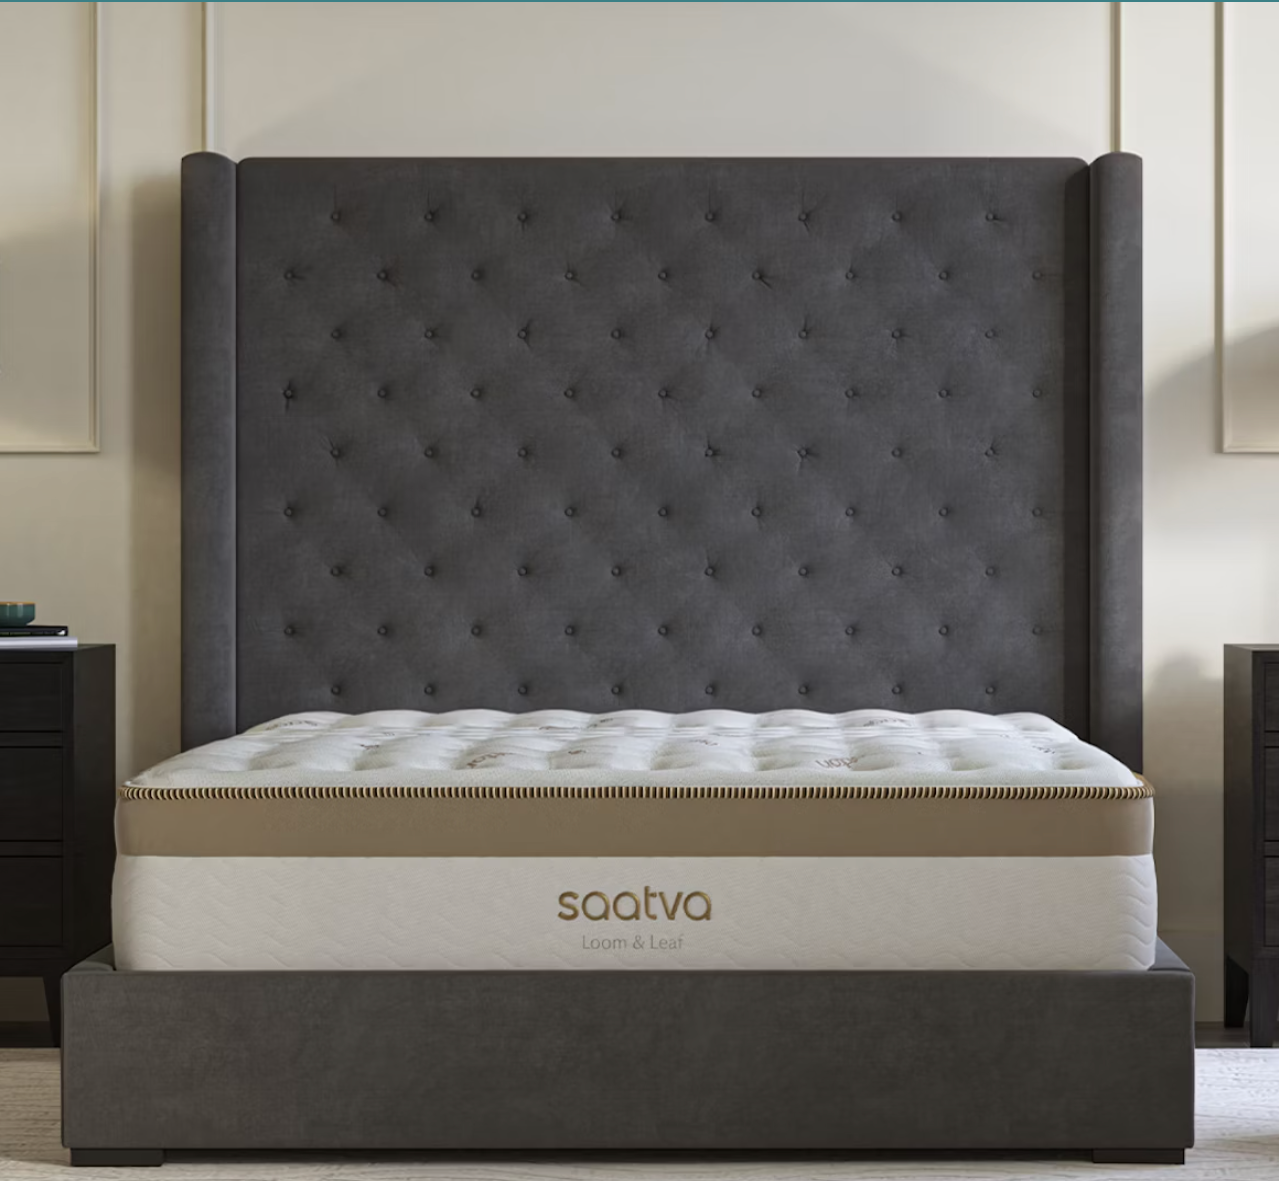 An eco-friendly foam mattress on a tufted bed frame.